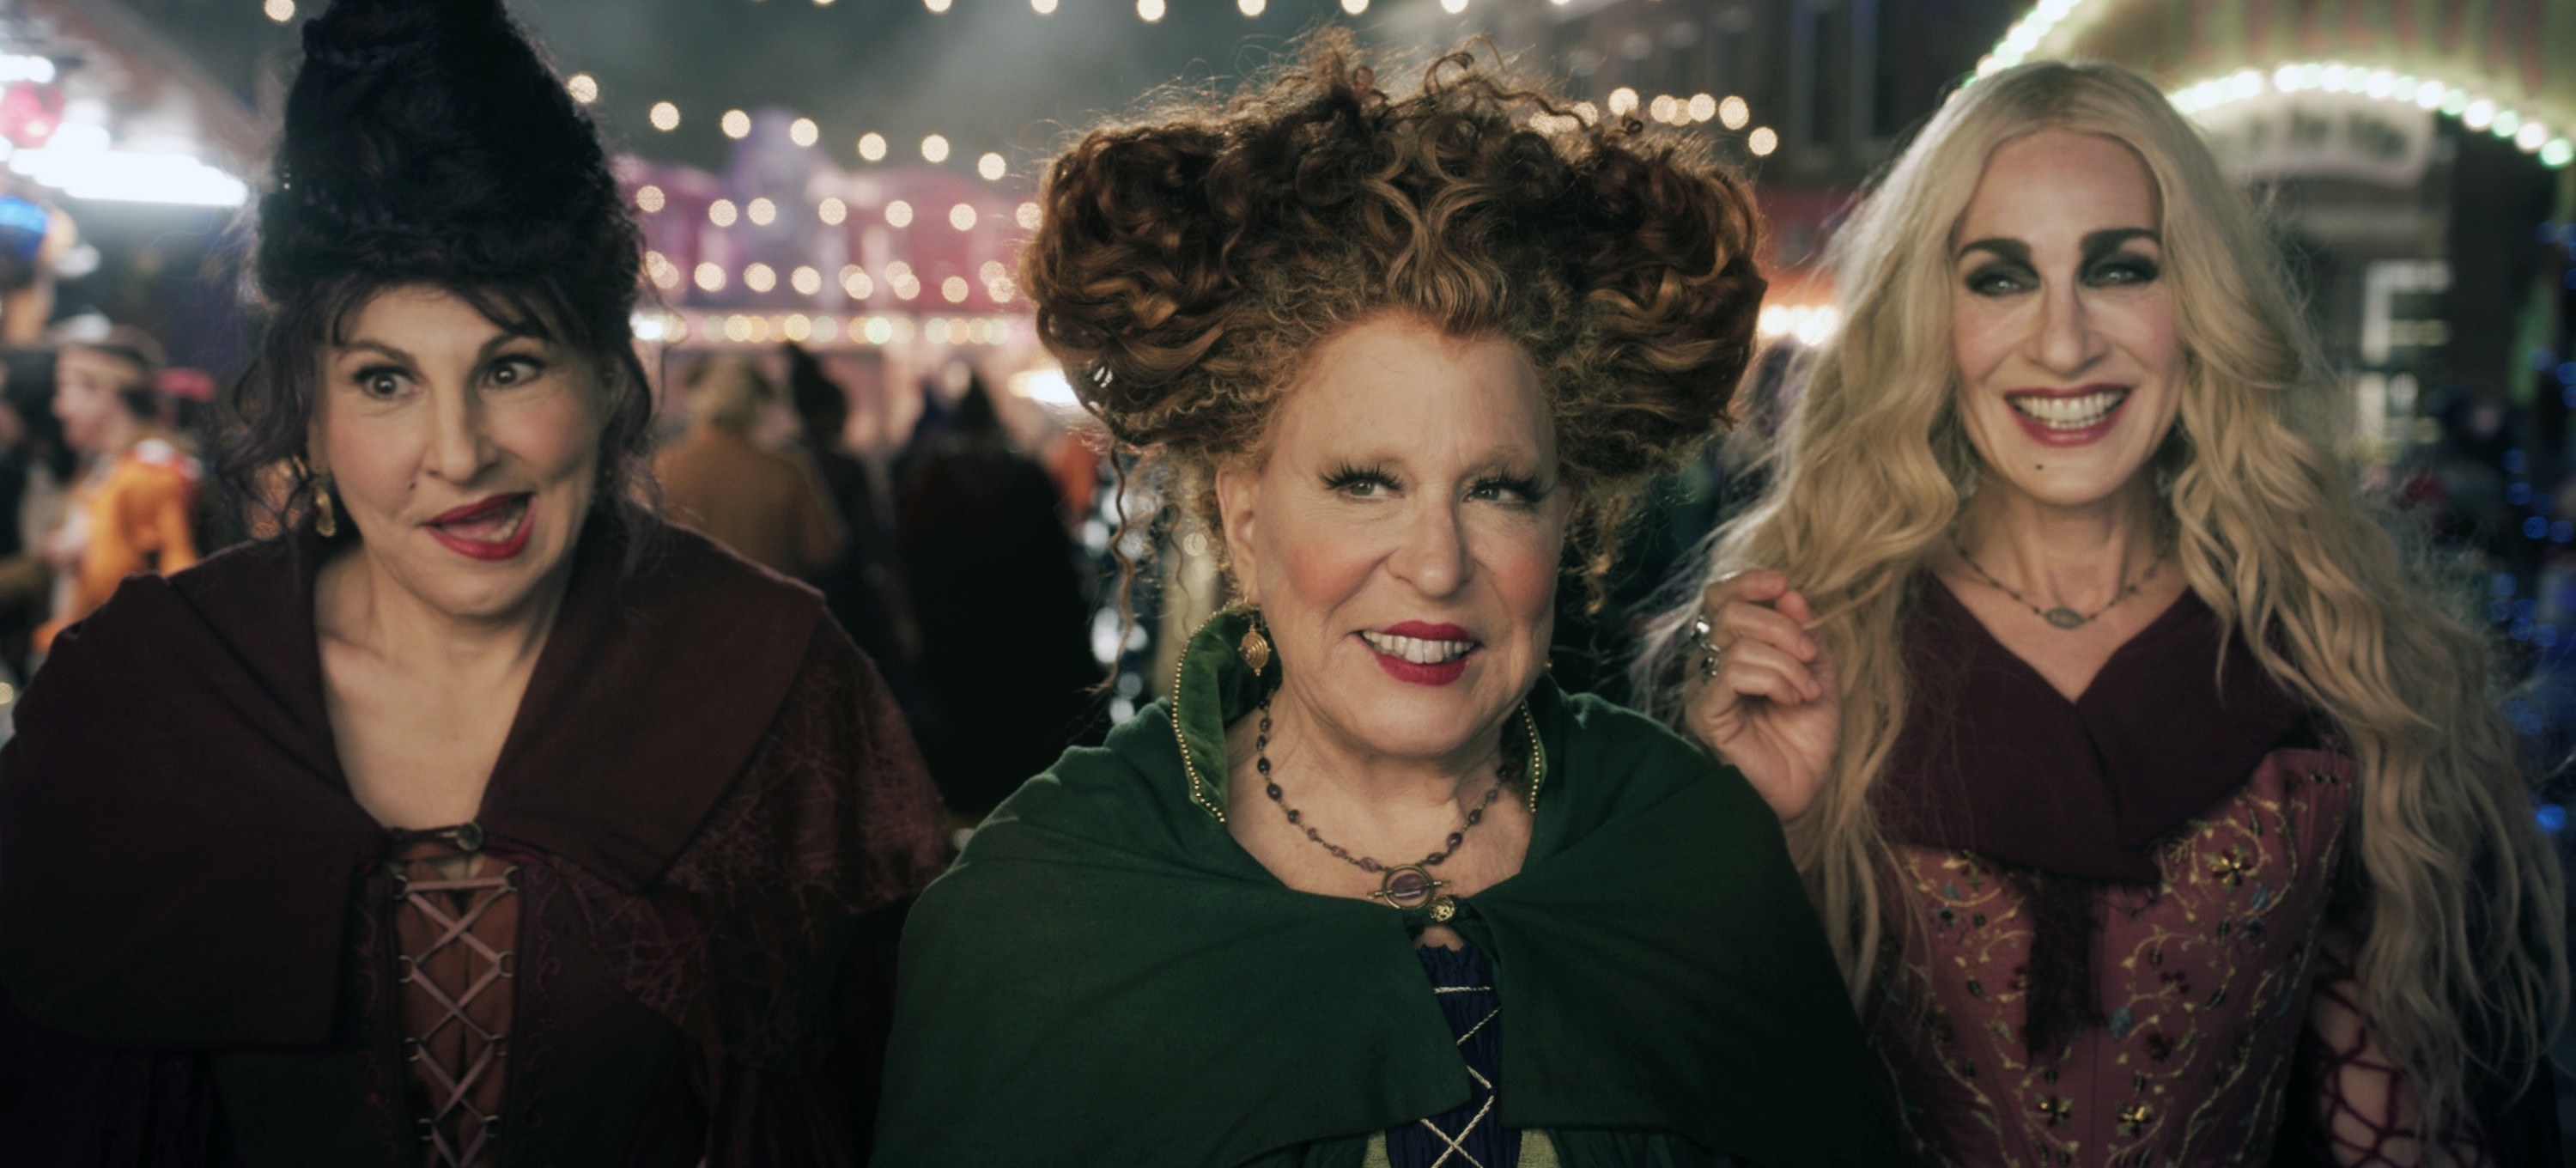 Kathy Najimy, Bette Middler, and Sarah Jessica Parker dressed as witches